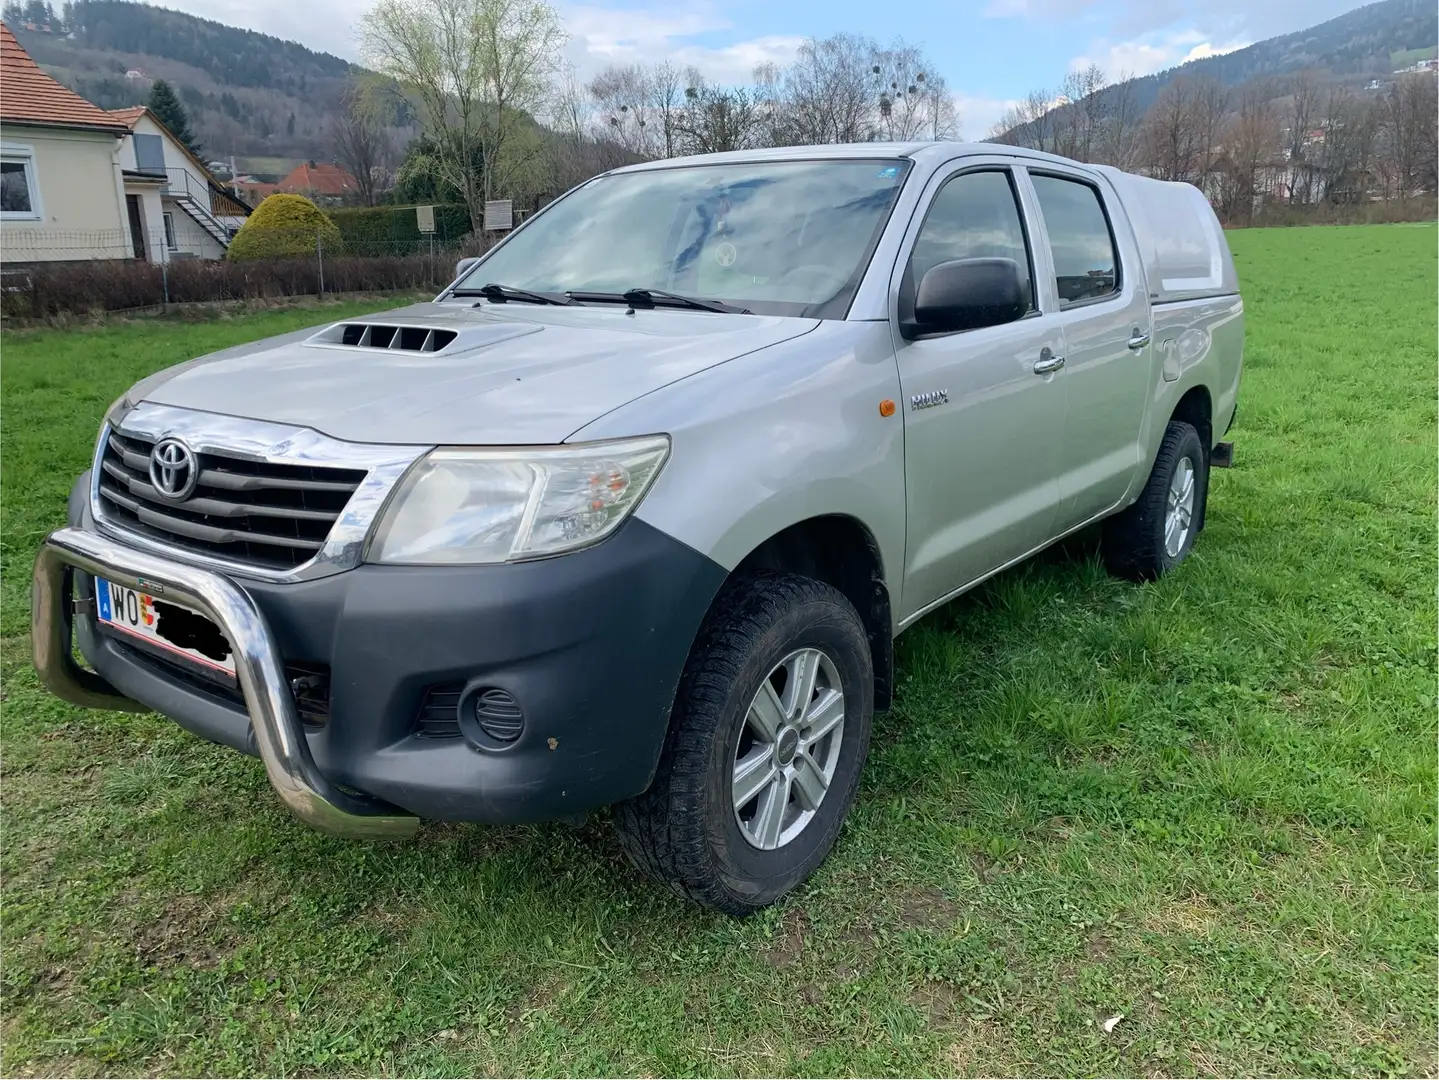 Toyota Hilux 2.5l 4x4 Country siva - 1